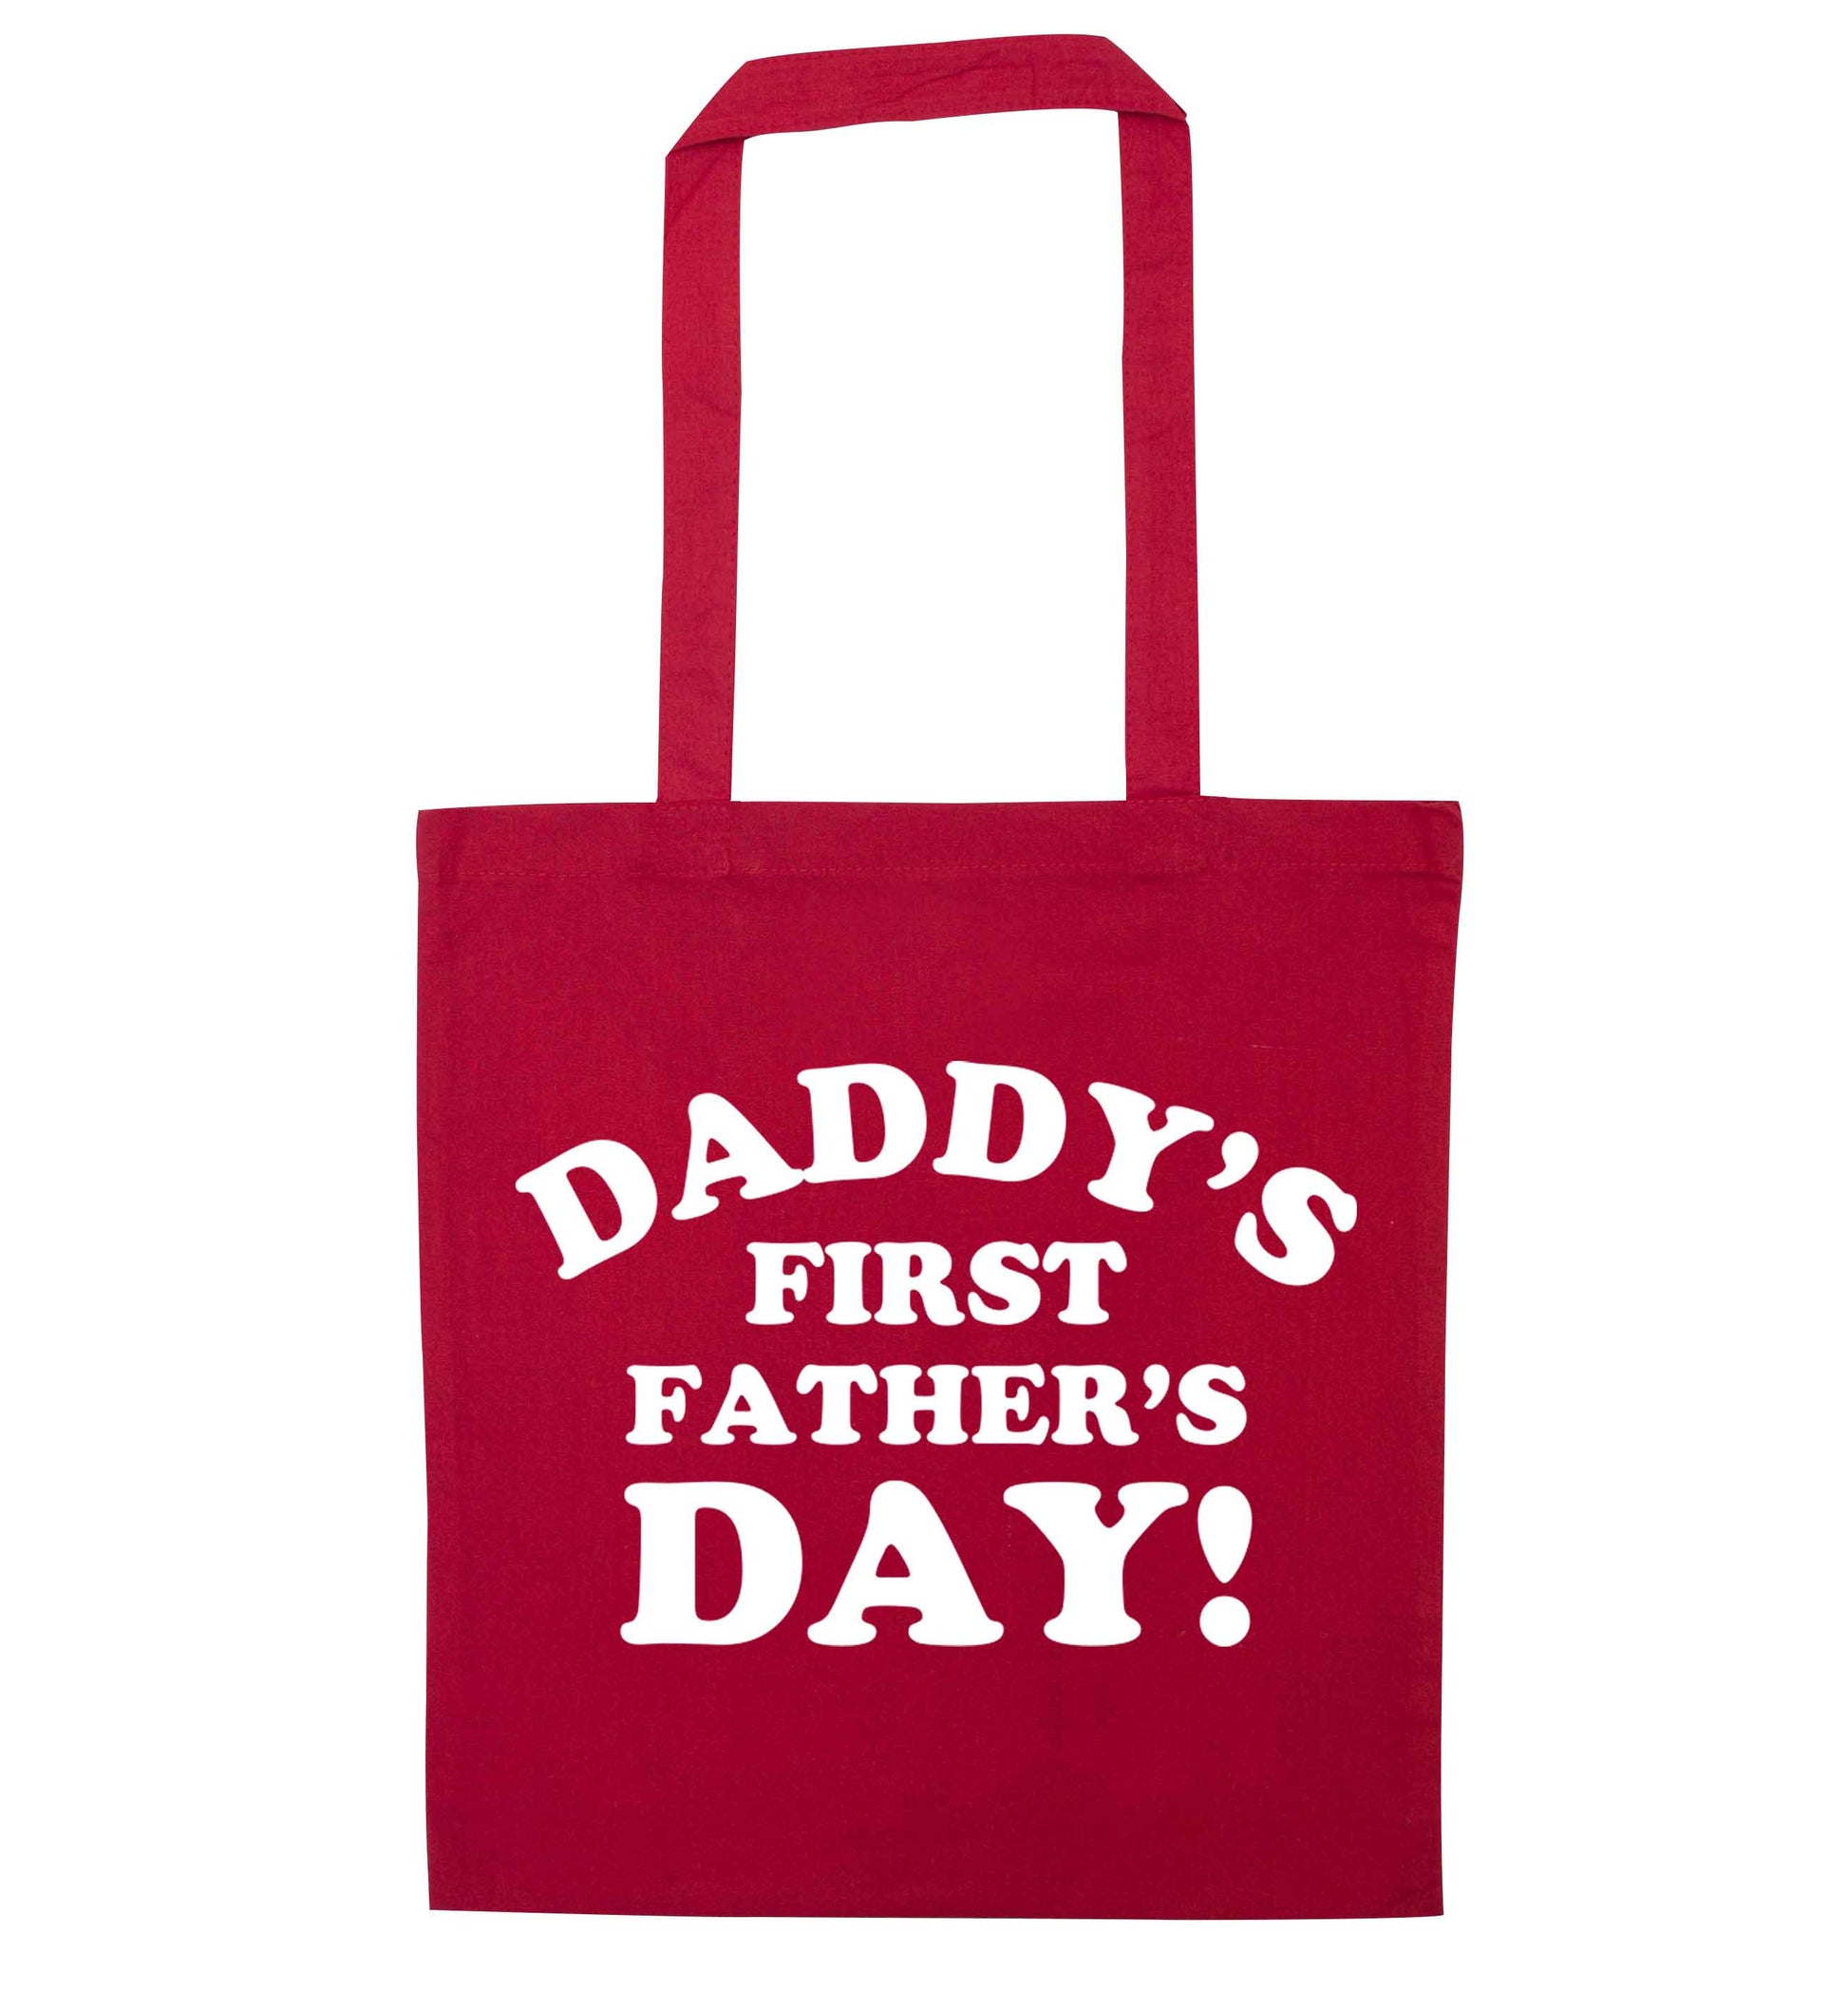 Daddy's first father's day red tote bag